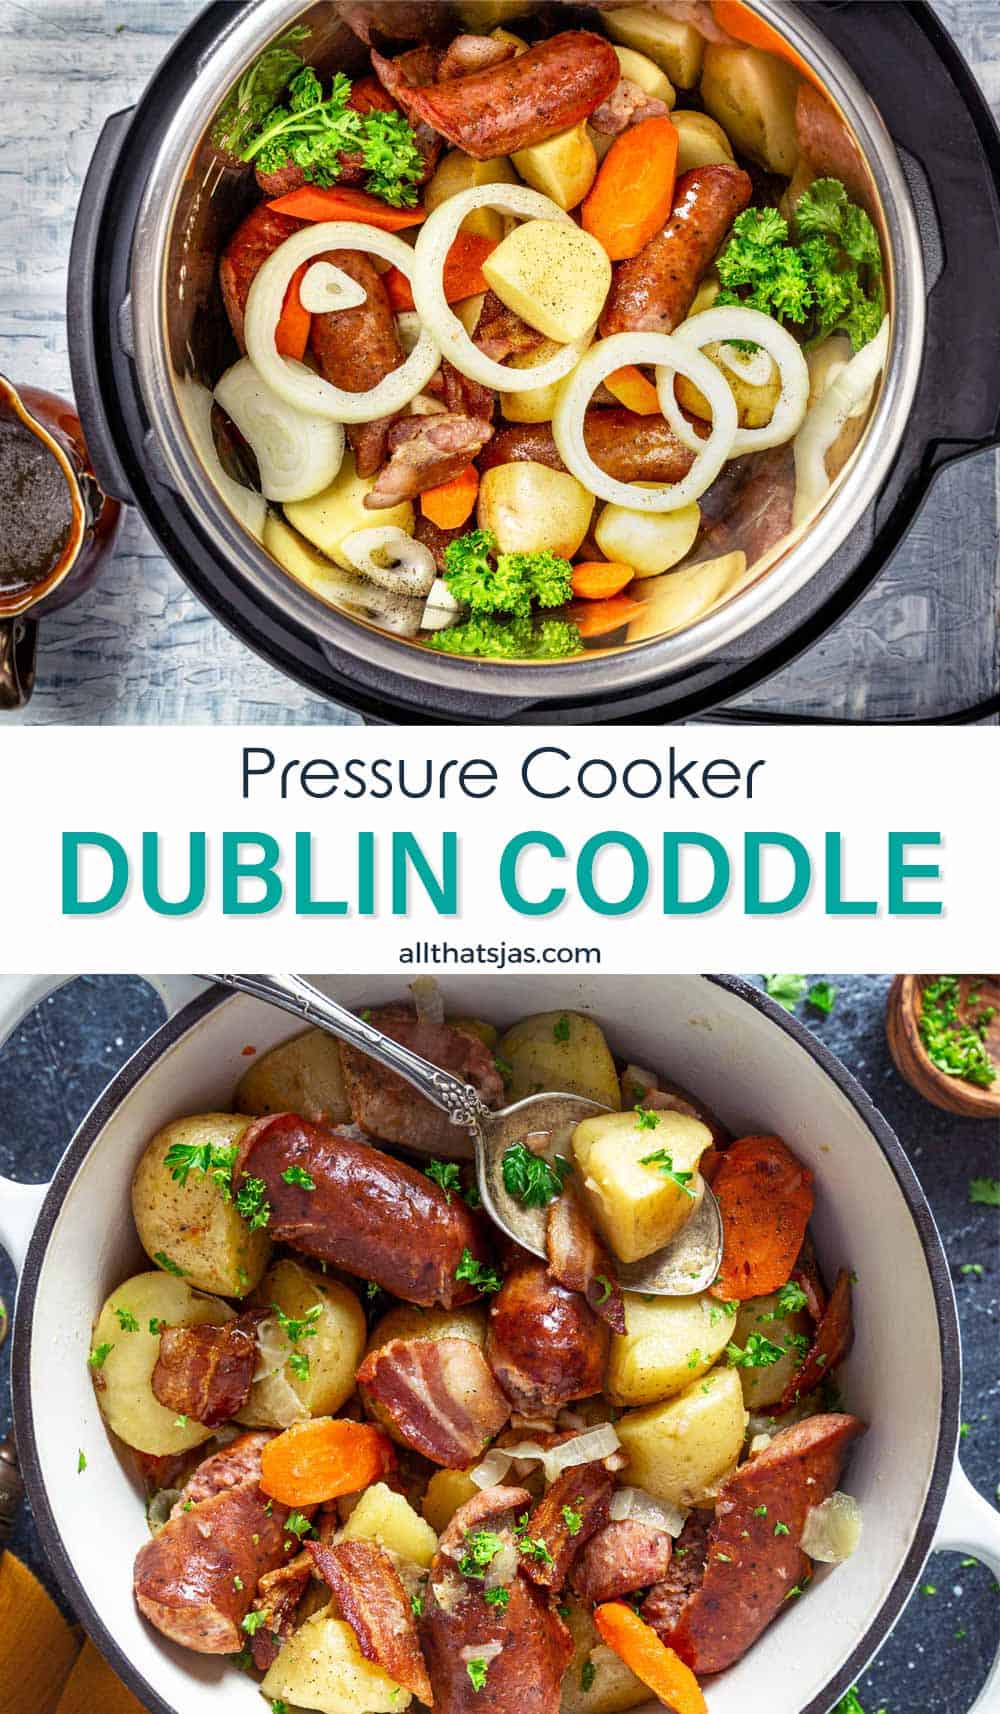 Two photo image of sausage and potato stew, aka Dublin Coddle in an Instant Pot with text overlay.